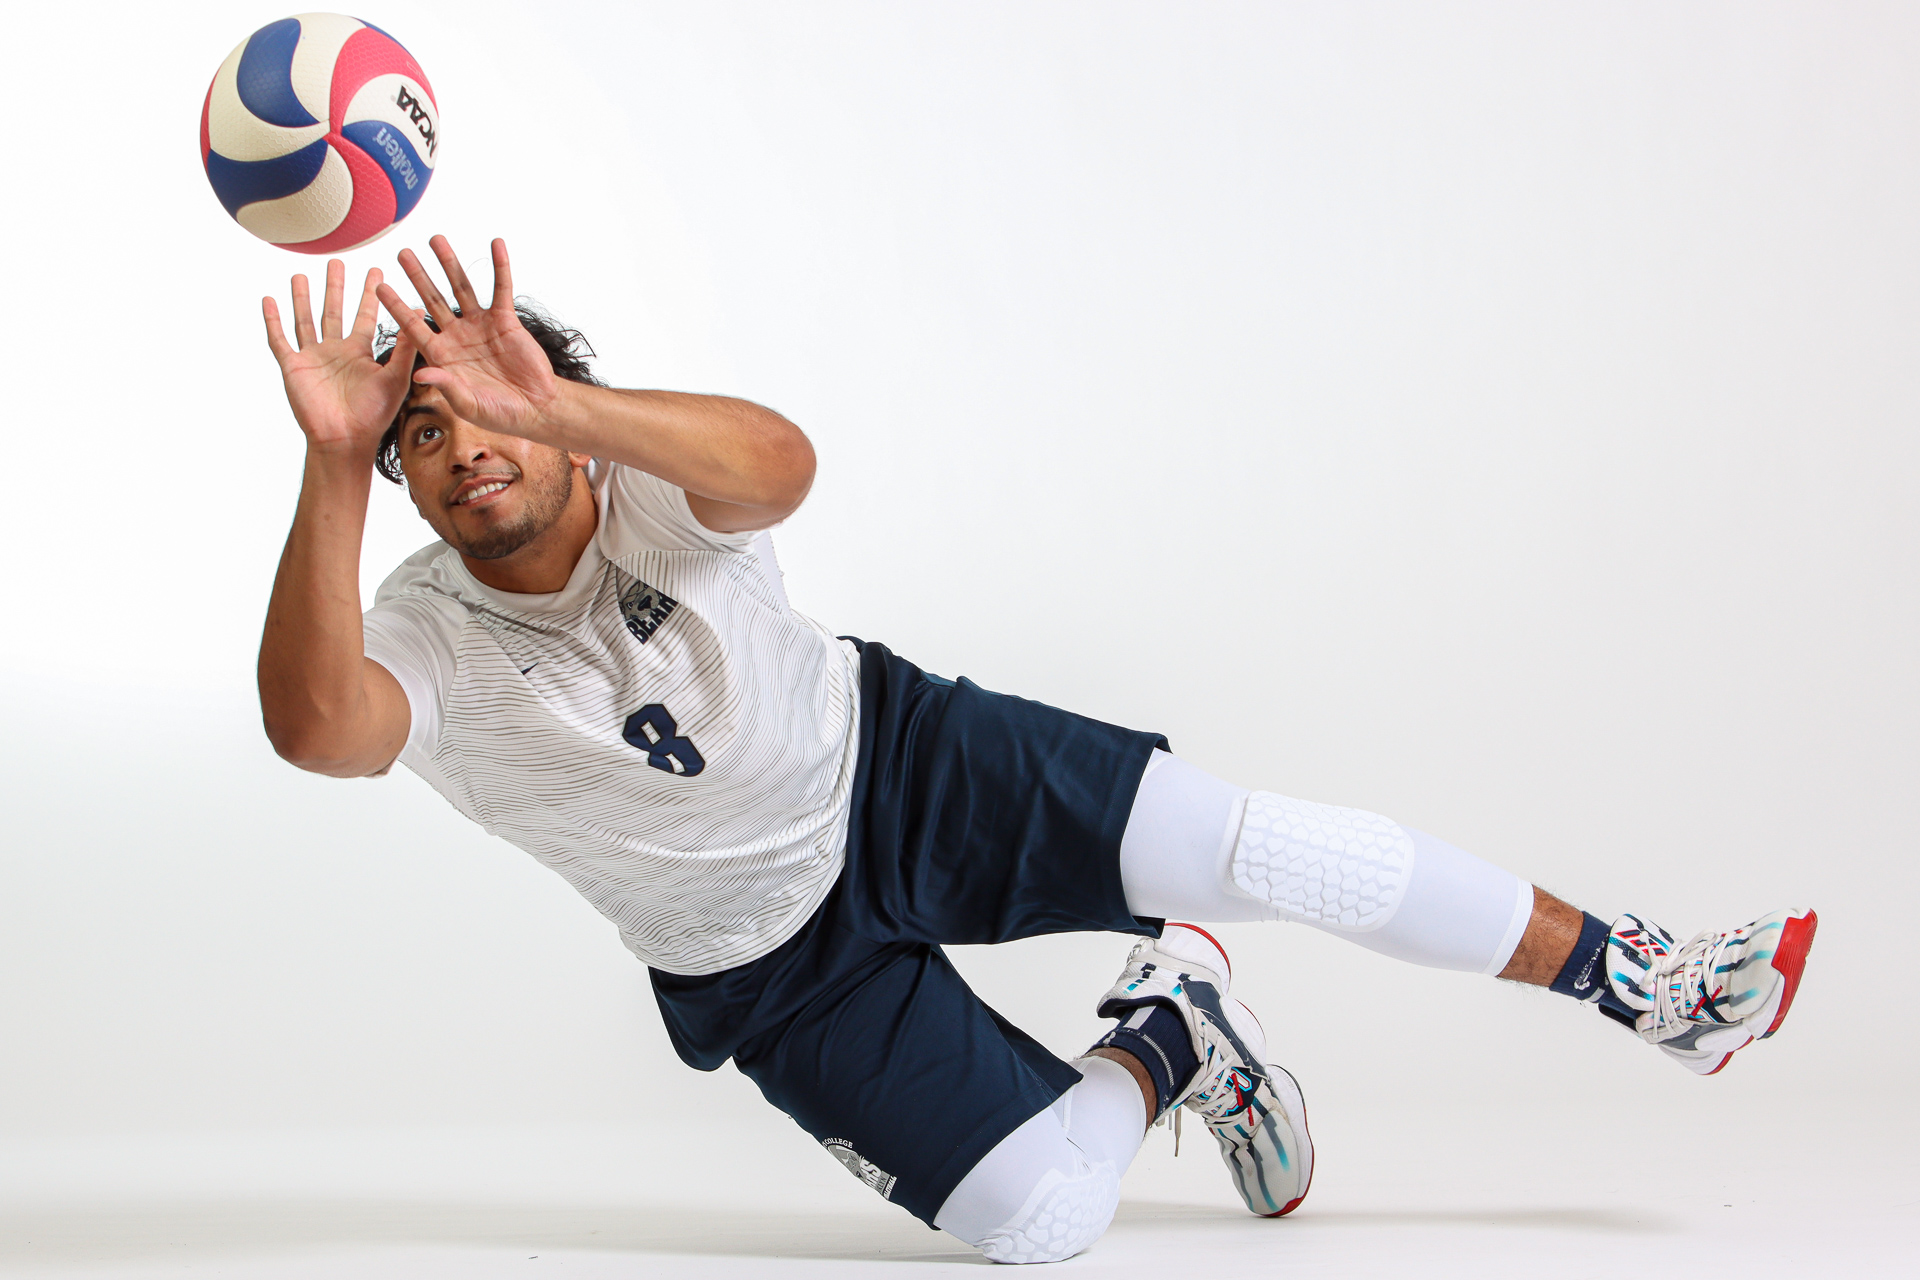 Men's Volleyball Photo Day